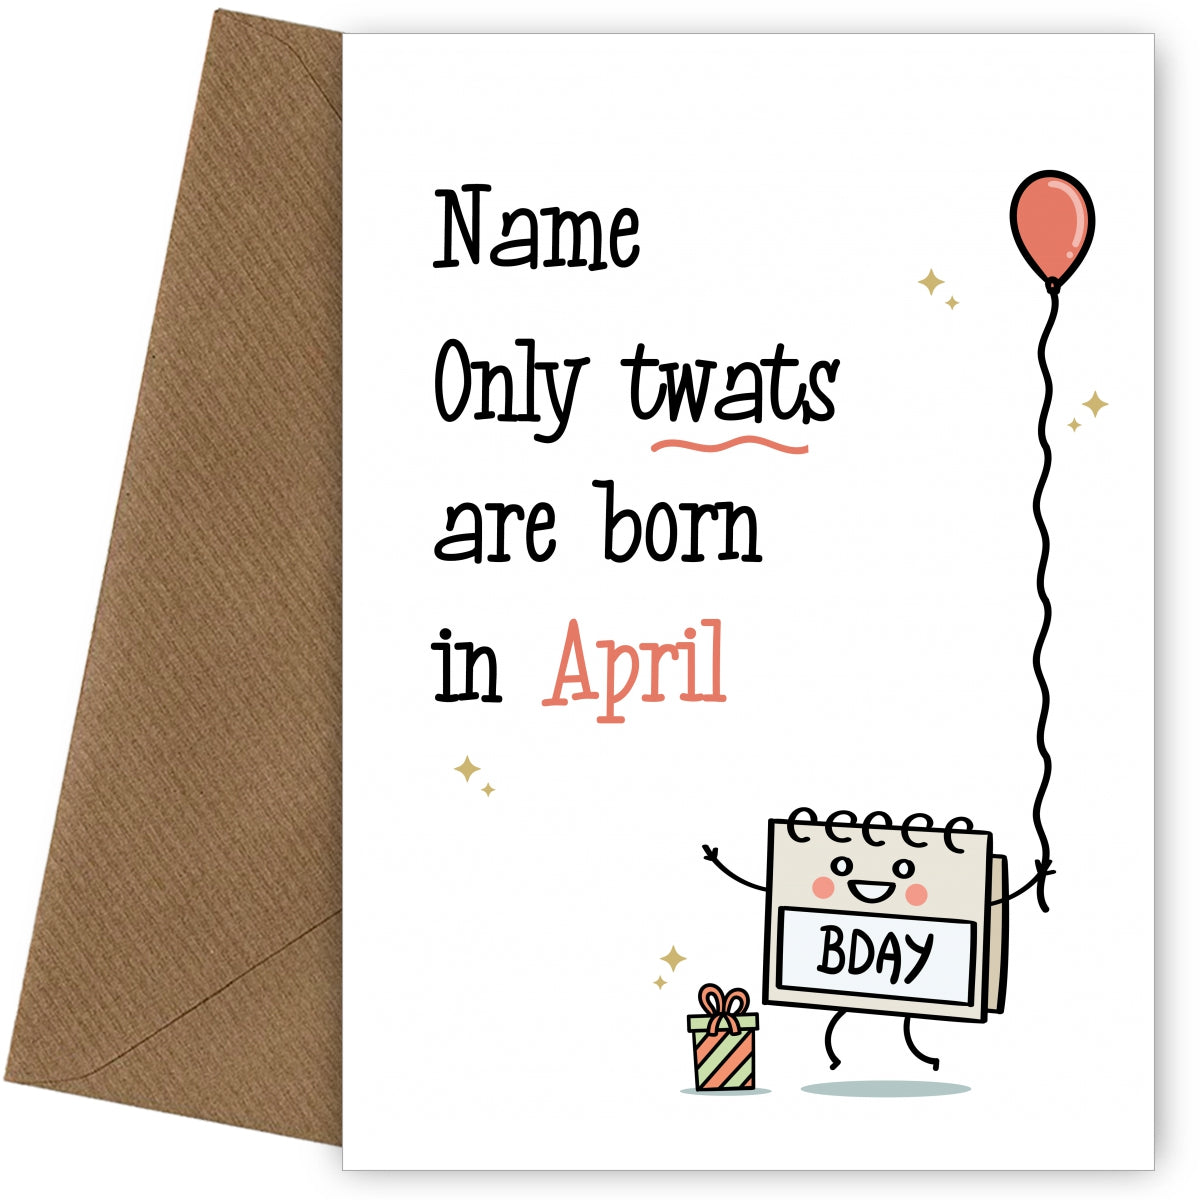 Only Tw@ts are Born in April Birthday Card for Him or Her